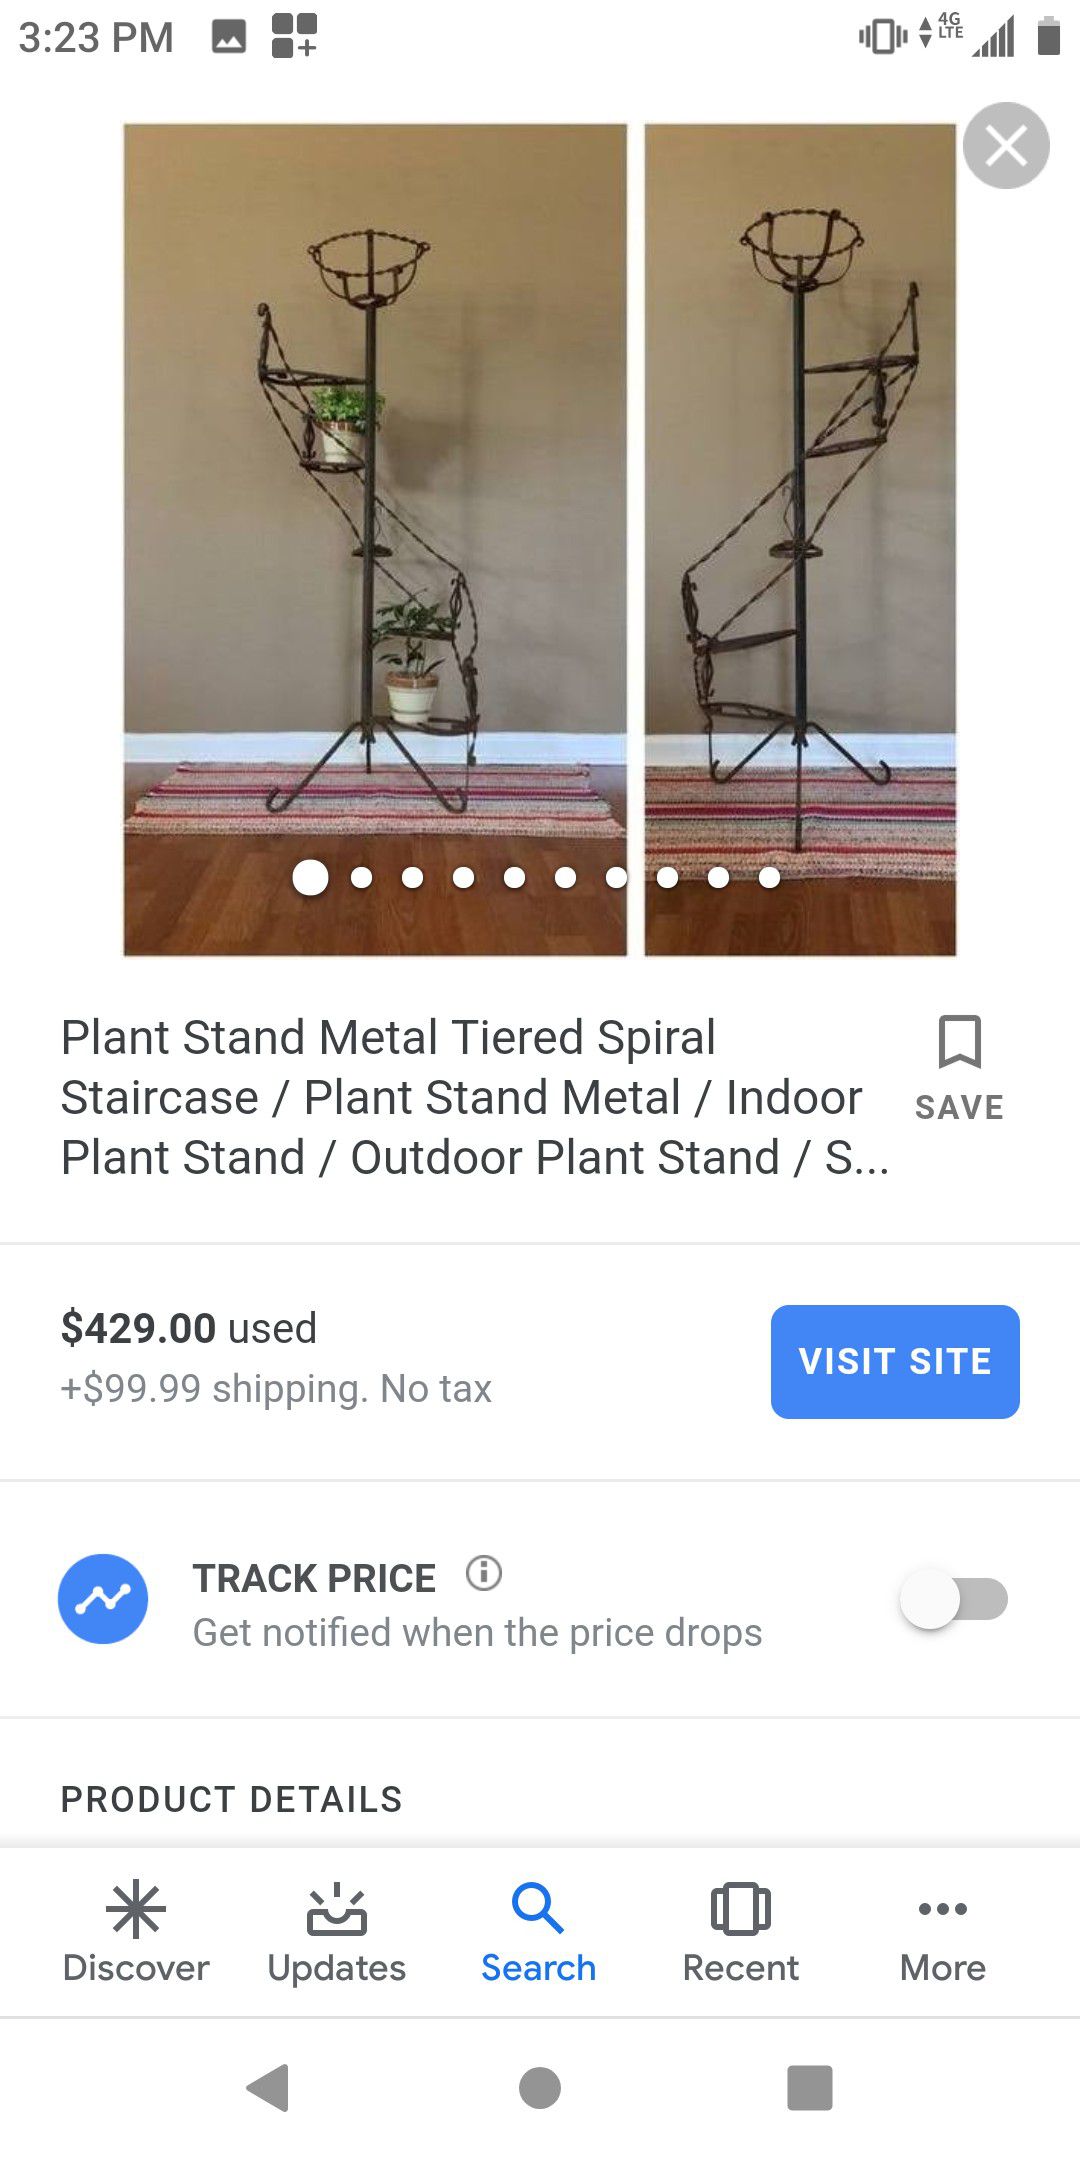 Spiral Metal Plant Stand (Make me an offer)